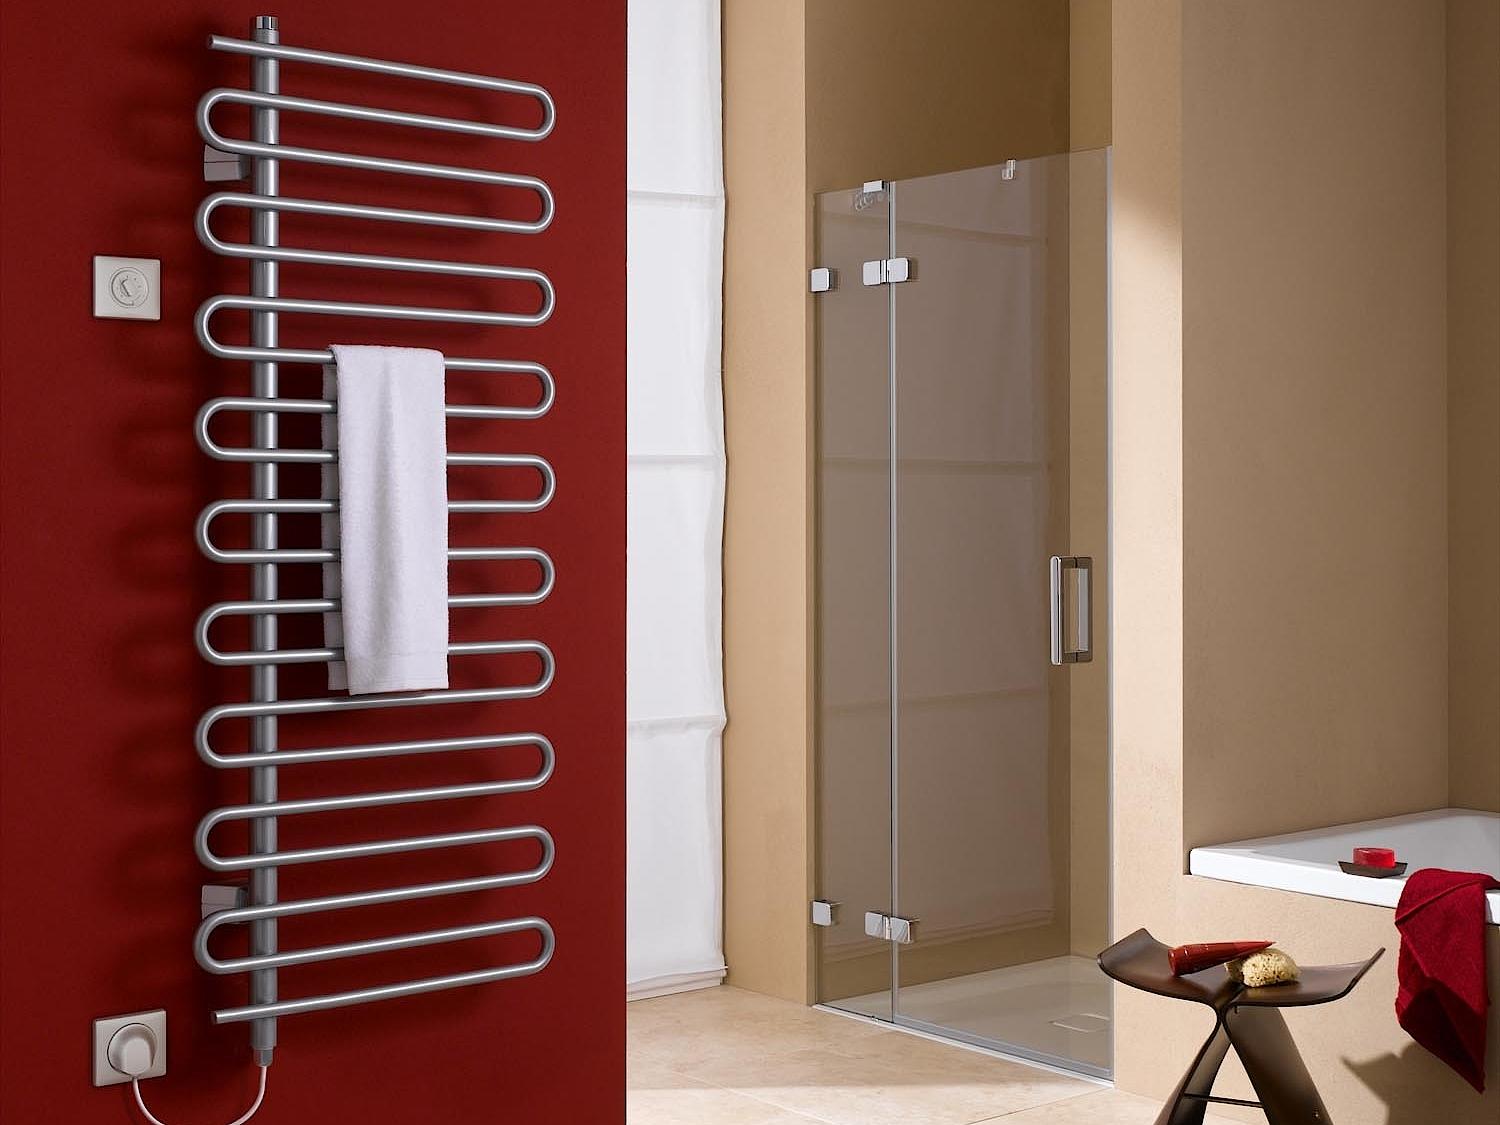 The Kermi Icaro designer and bathroom radiator is also available in an electric version.